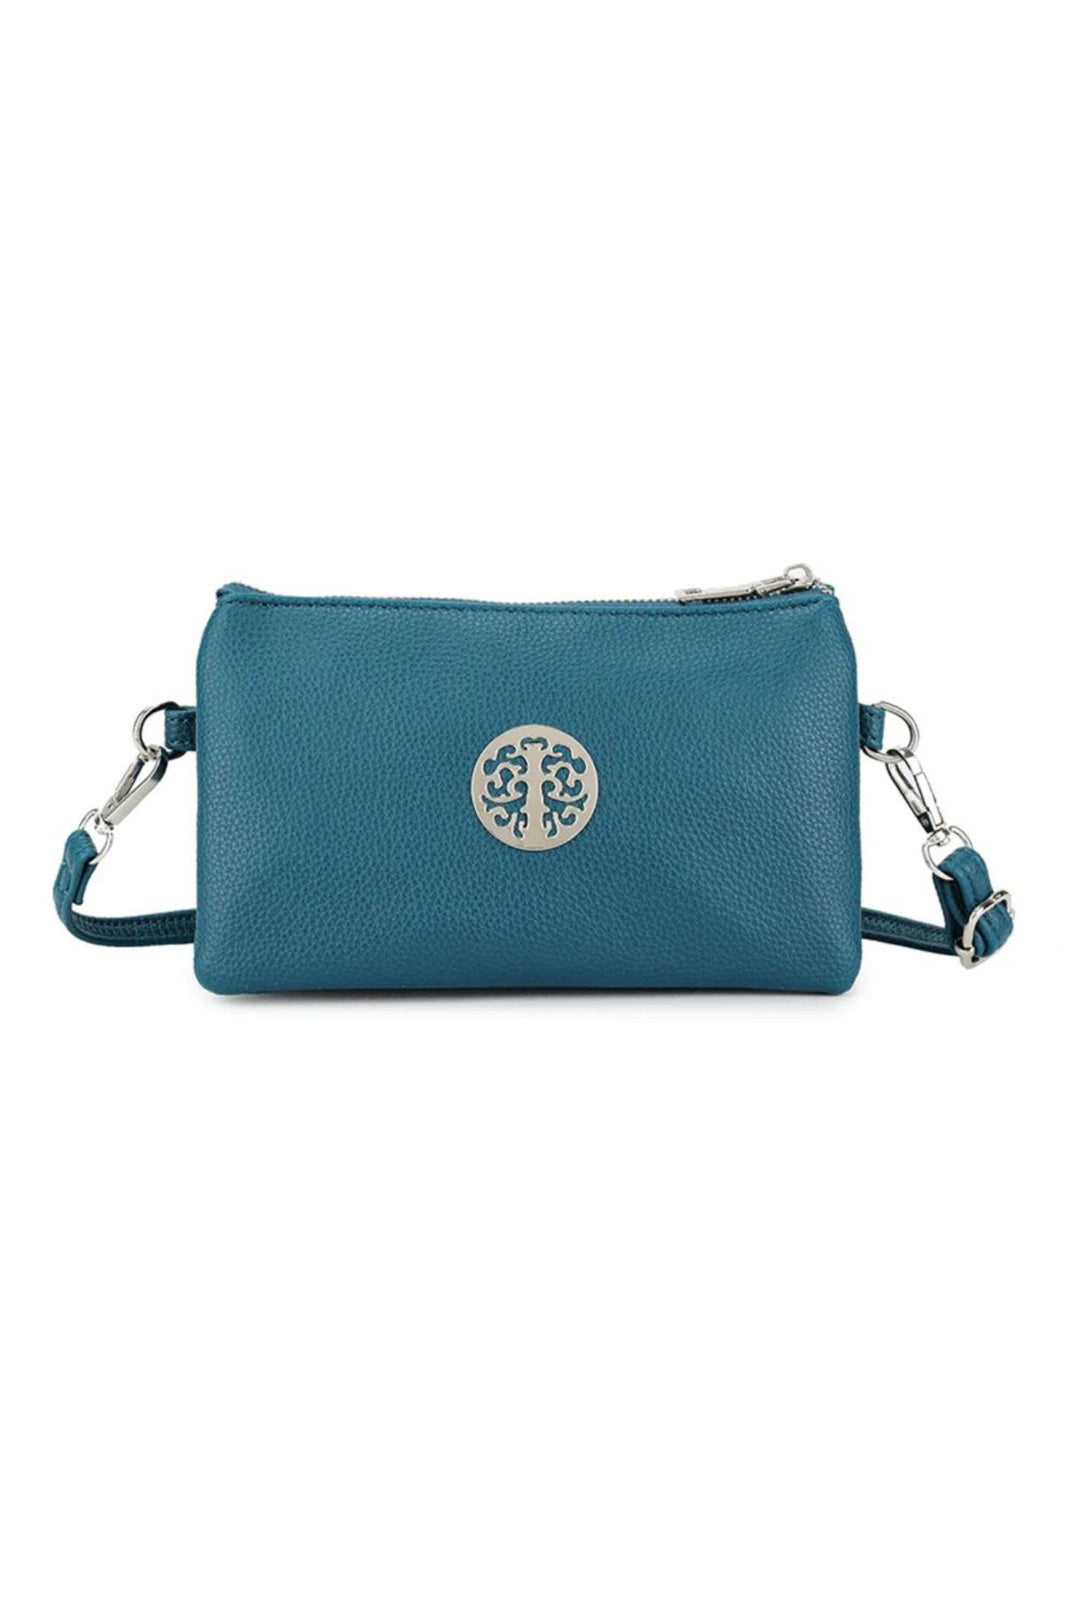 Teal Tree Of Life Clutch Bag – Experience